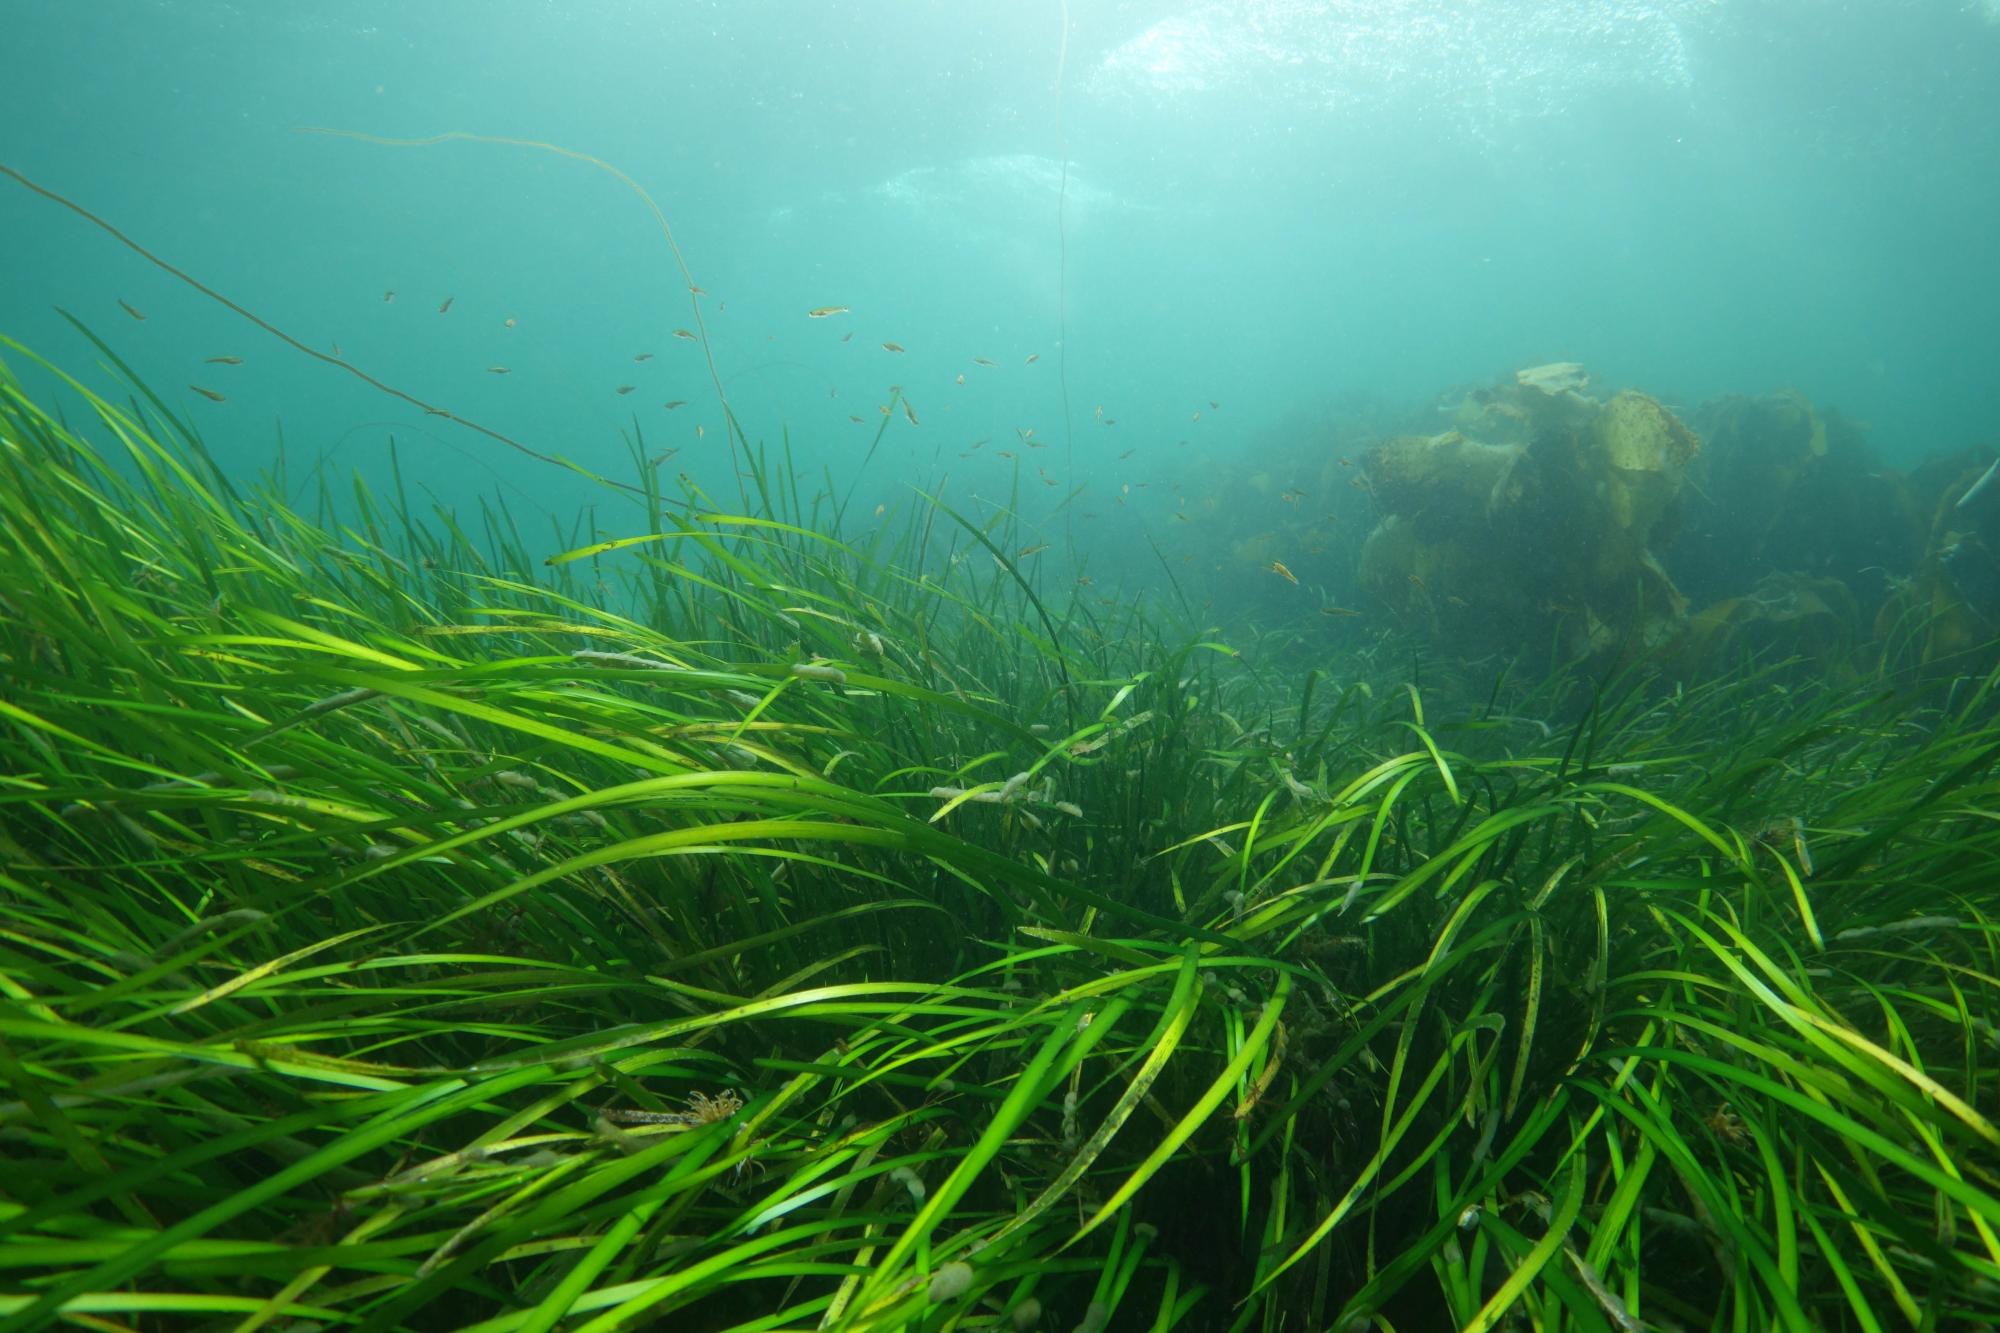 A seagrass bed with small fish swimming above.